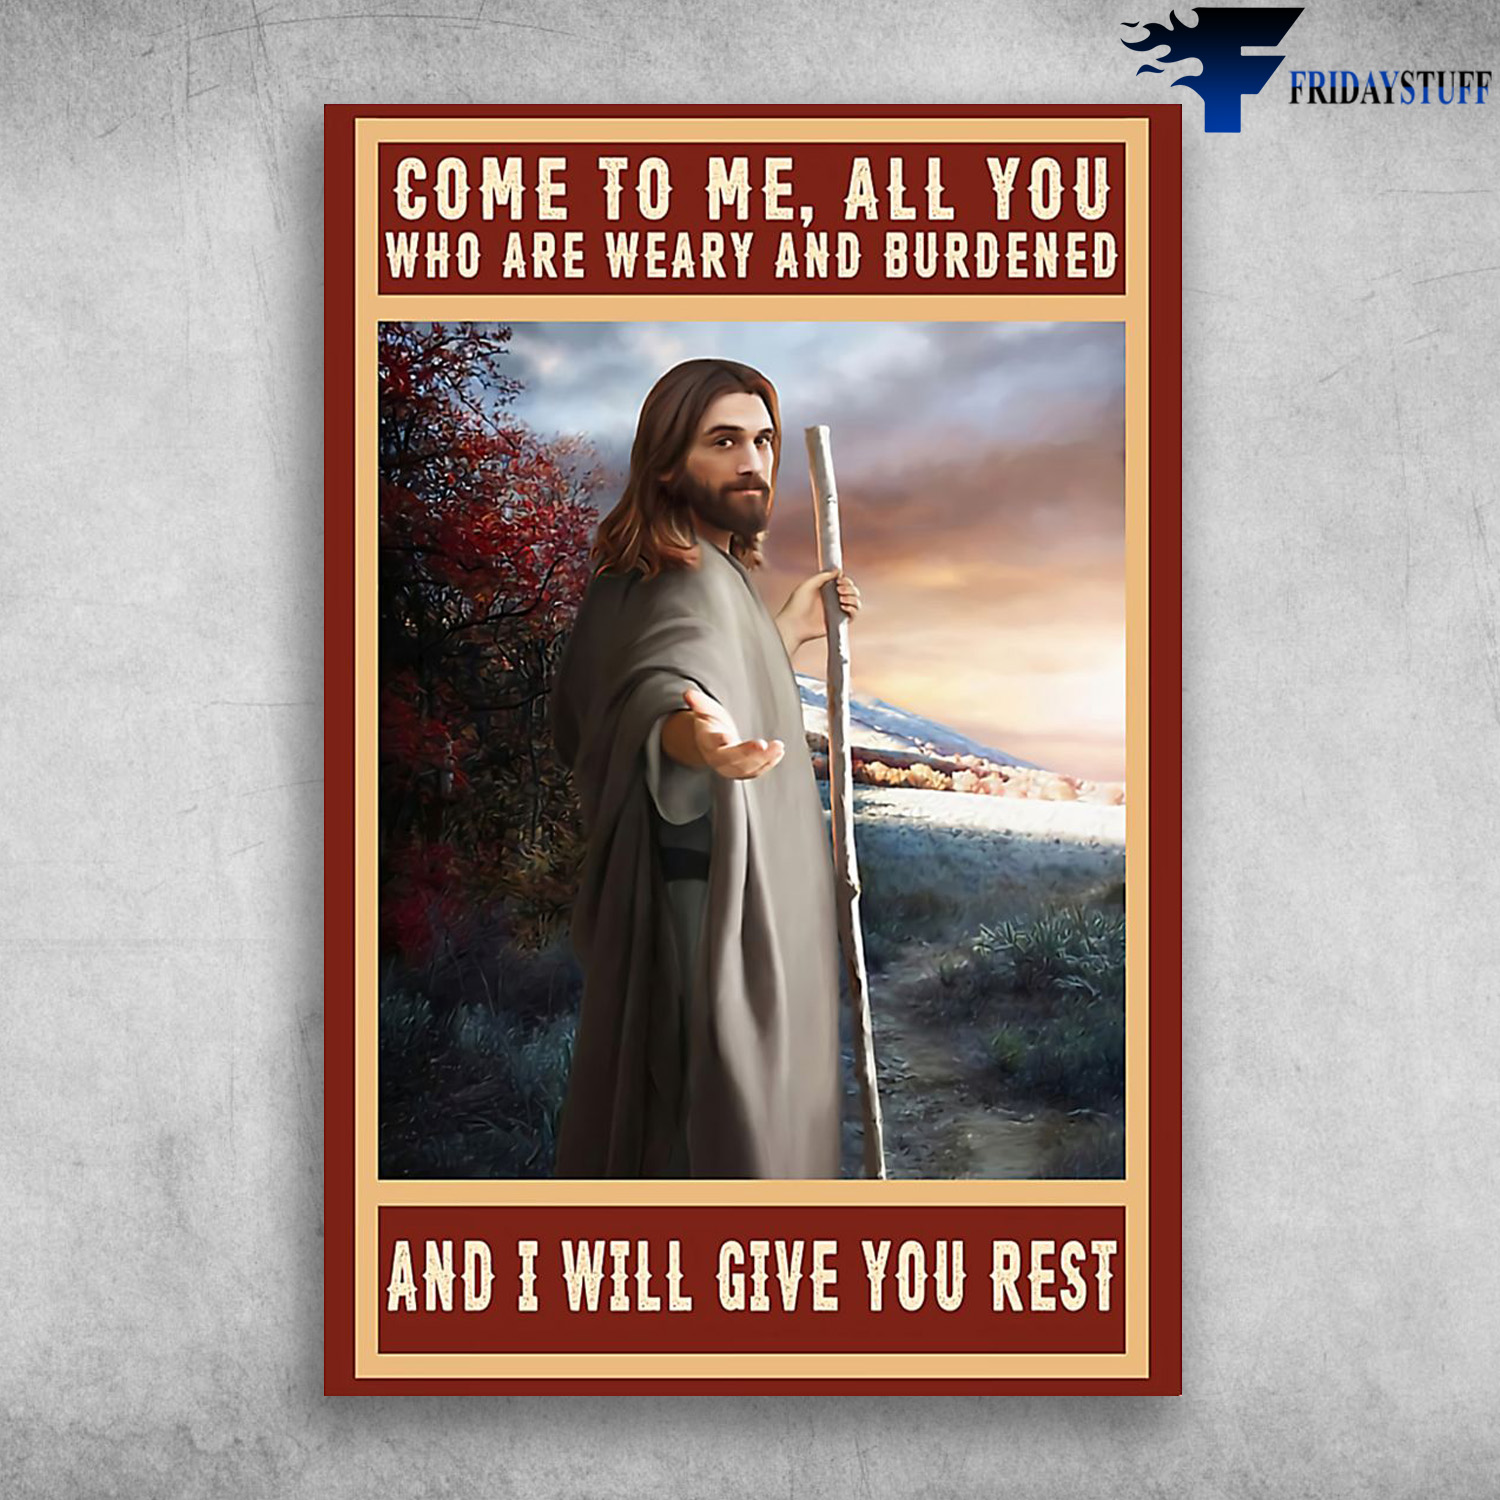 Jesus Christ - Come To Me, All You Who Are Weary And Burdened, And I Will Give You Rest